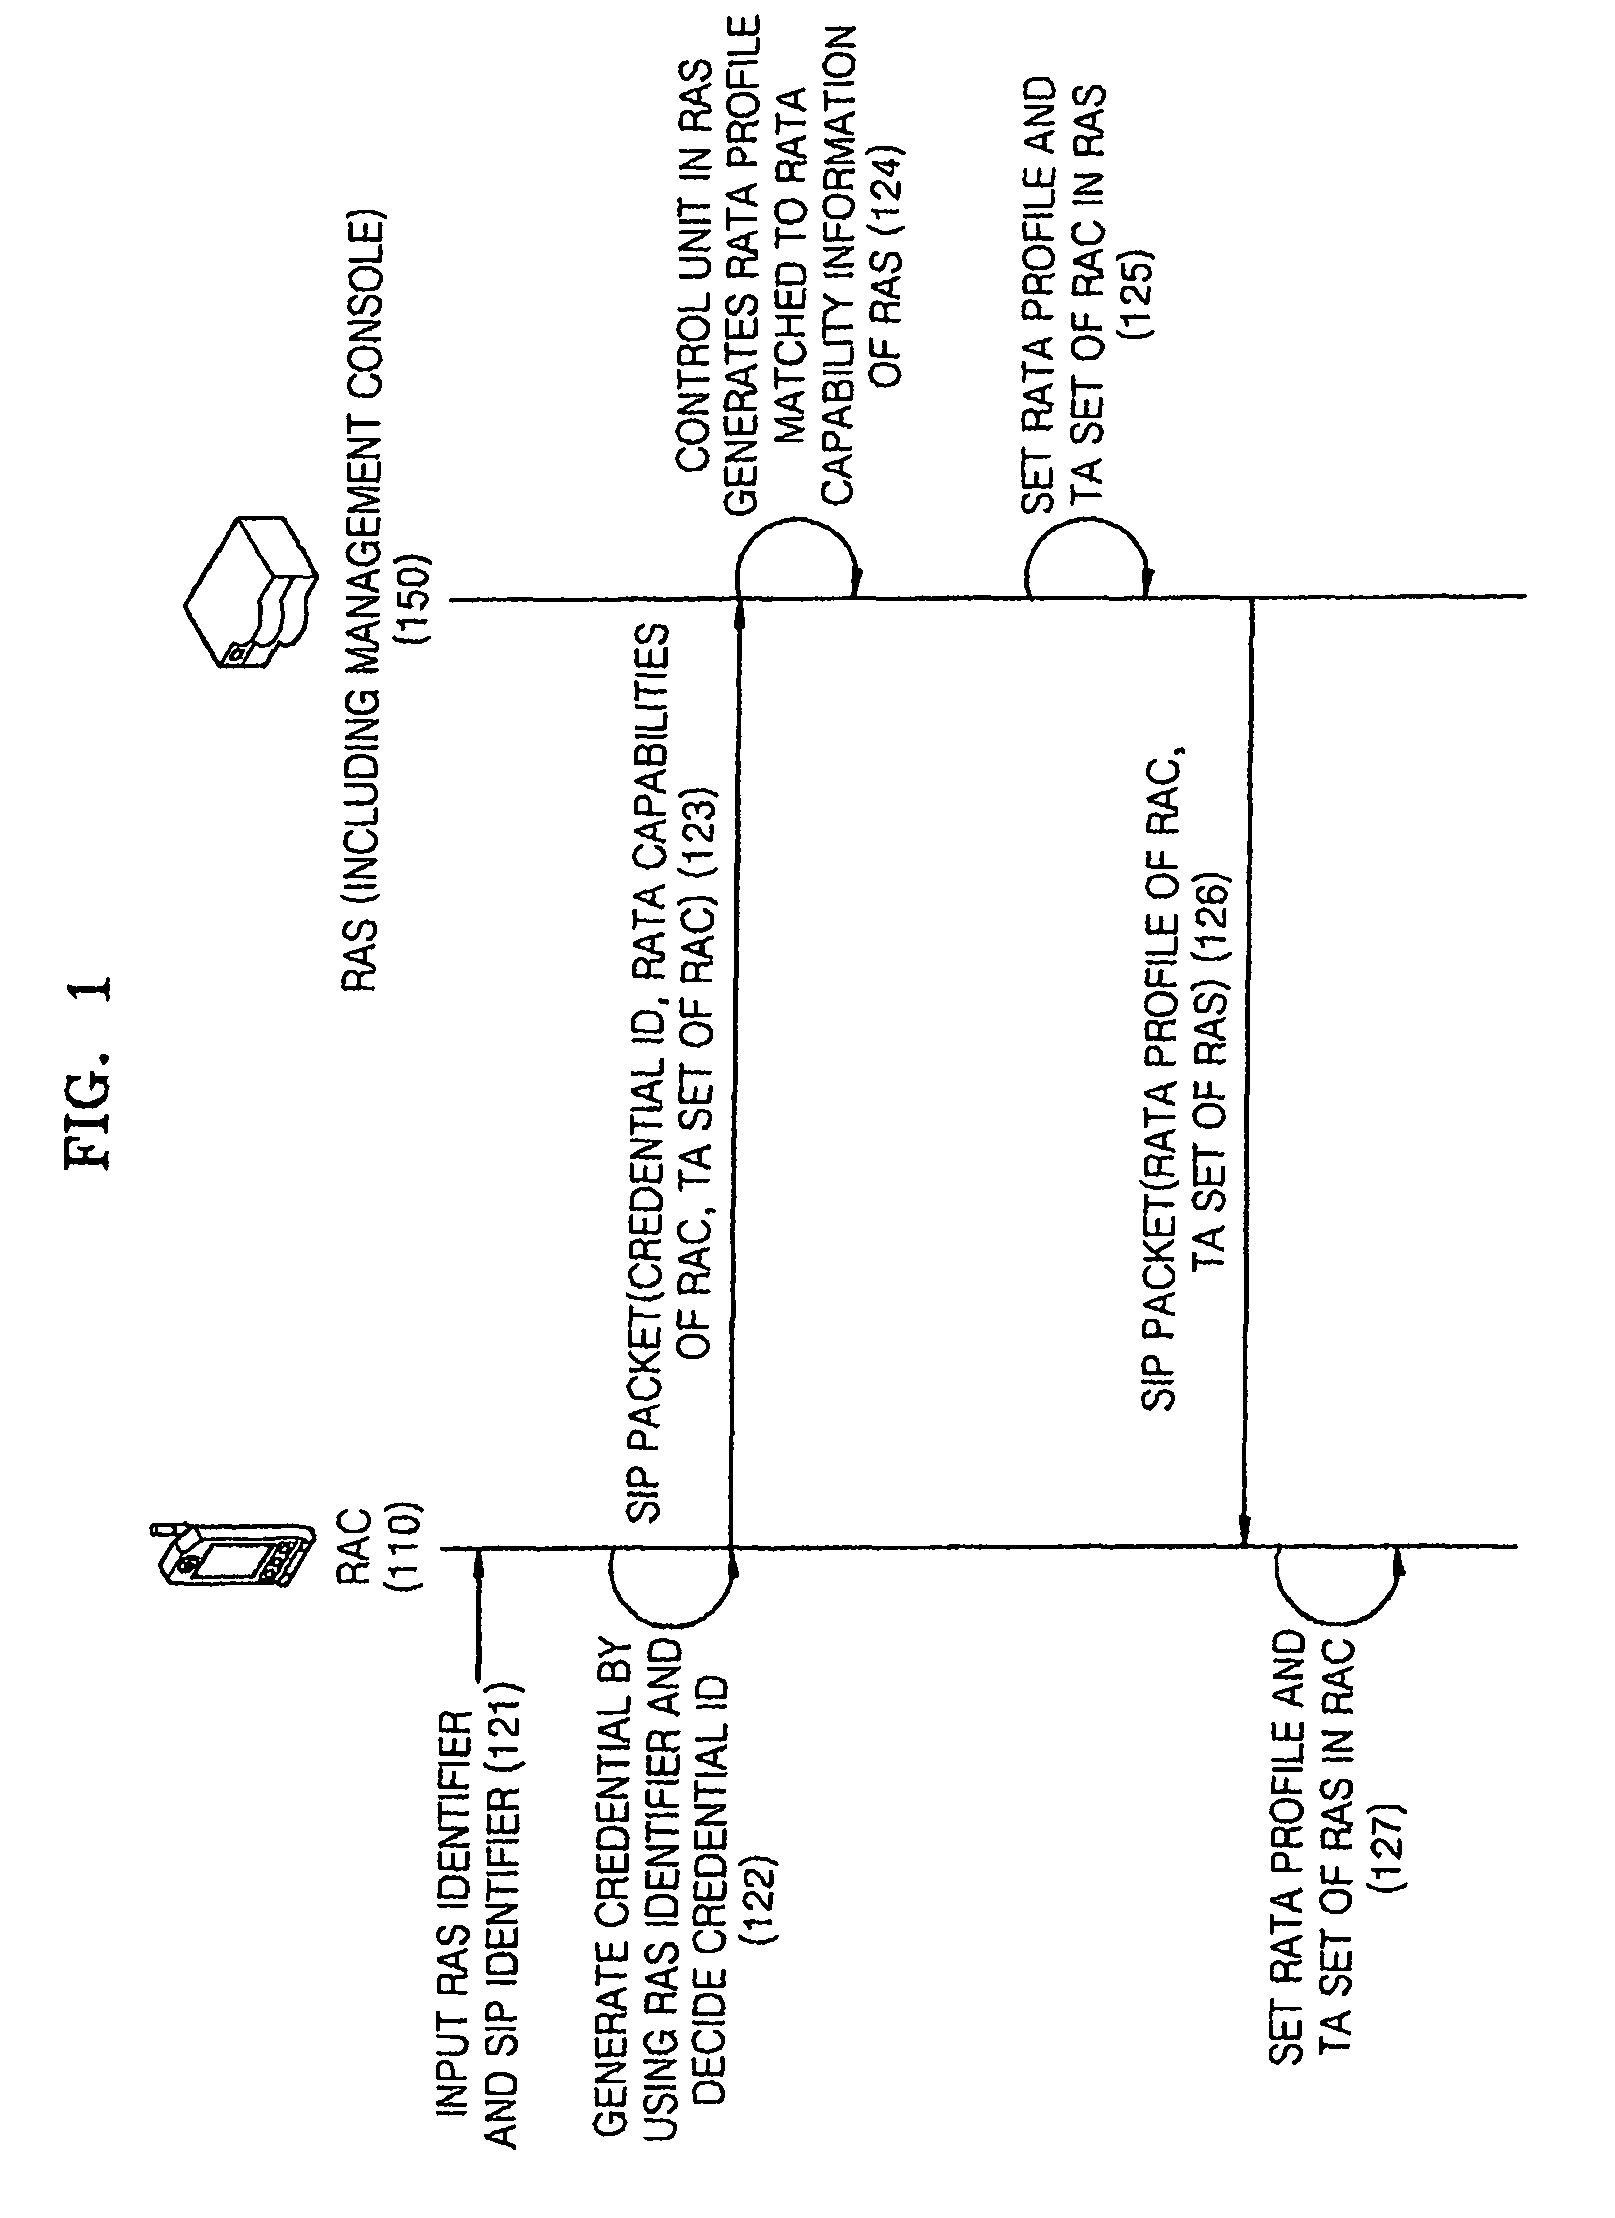 Universal plug and play method and apparatus to provide remote access service